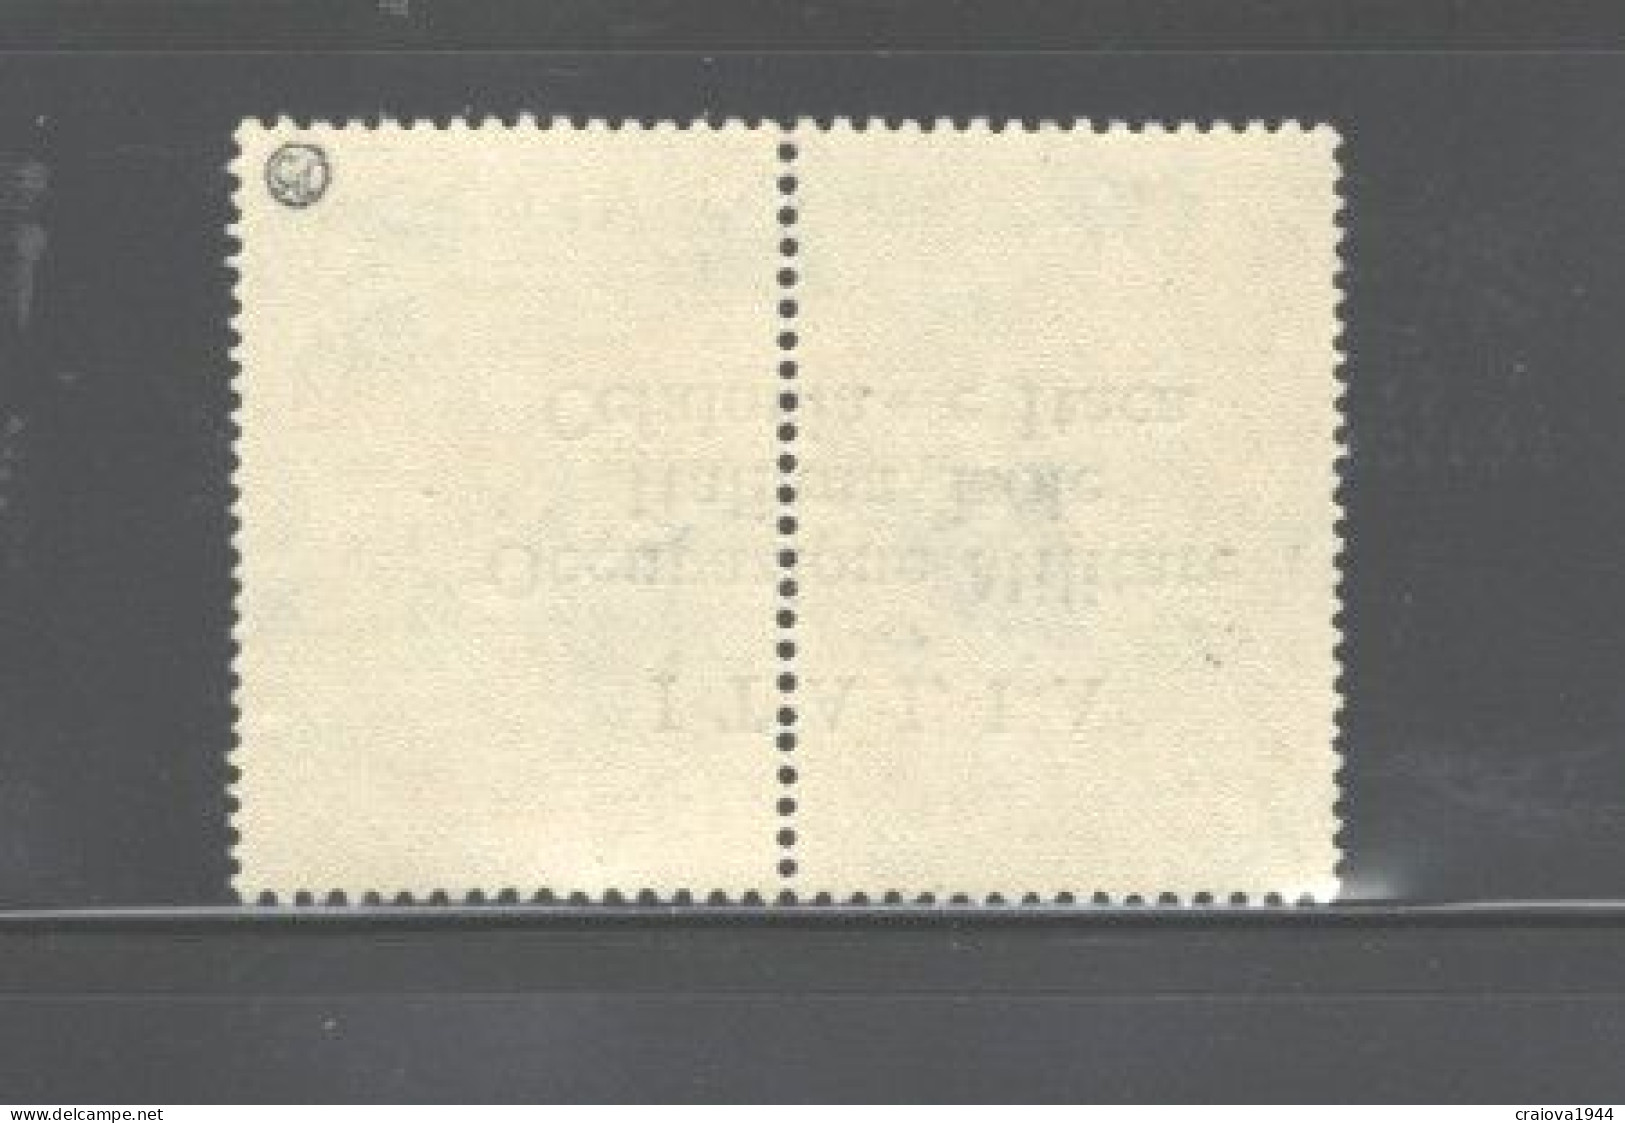 GREECE,1941 "ISSUE FOR CEPHALONIA & ITHACA" #N4 Certf.DROSSOS, "READ.DOWN" MNH - Isole Ioniche